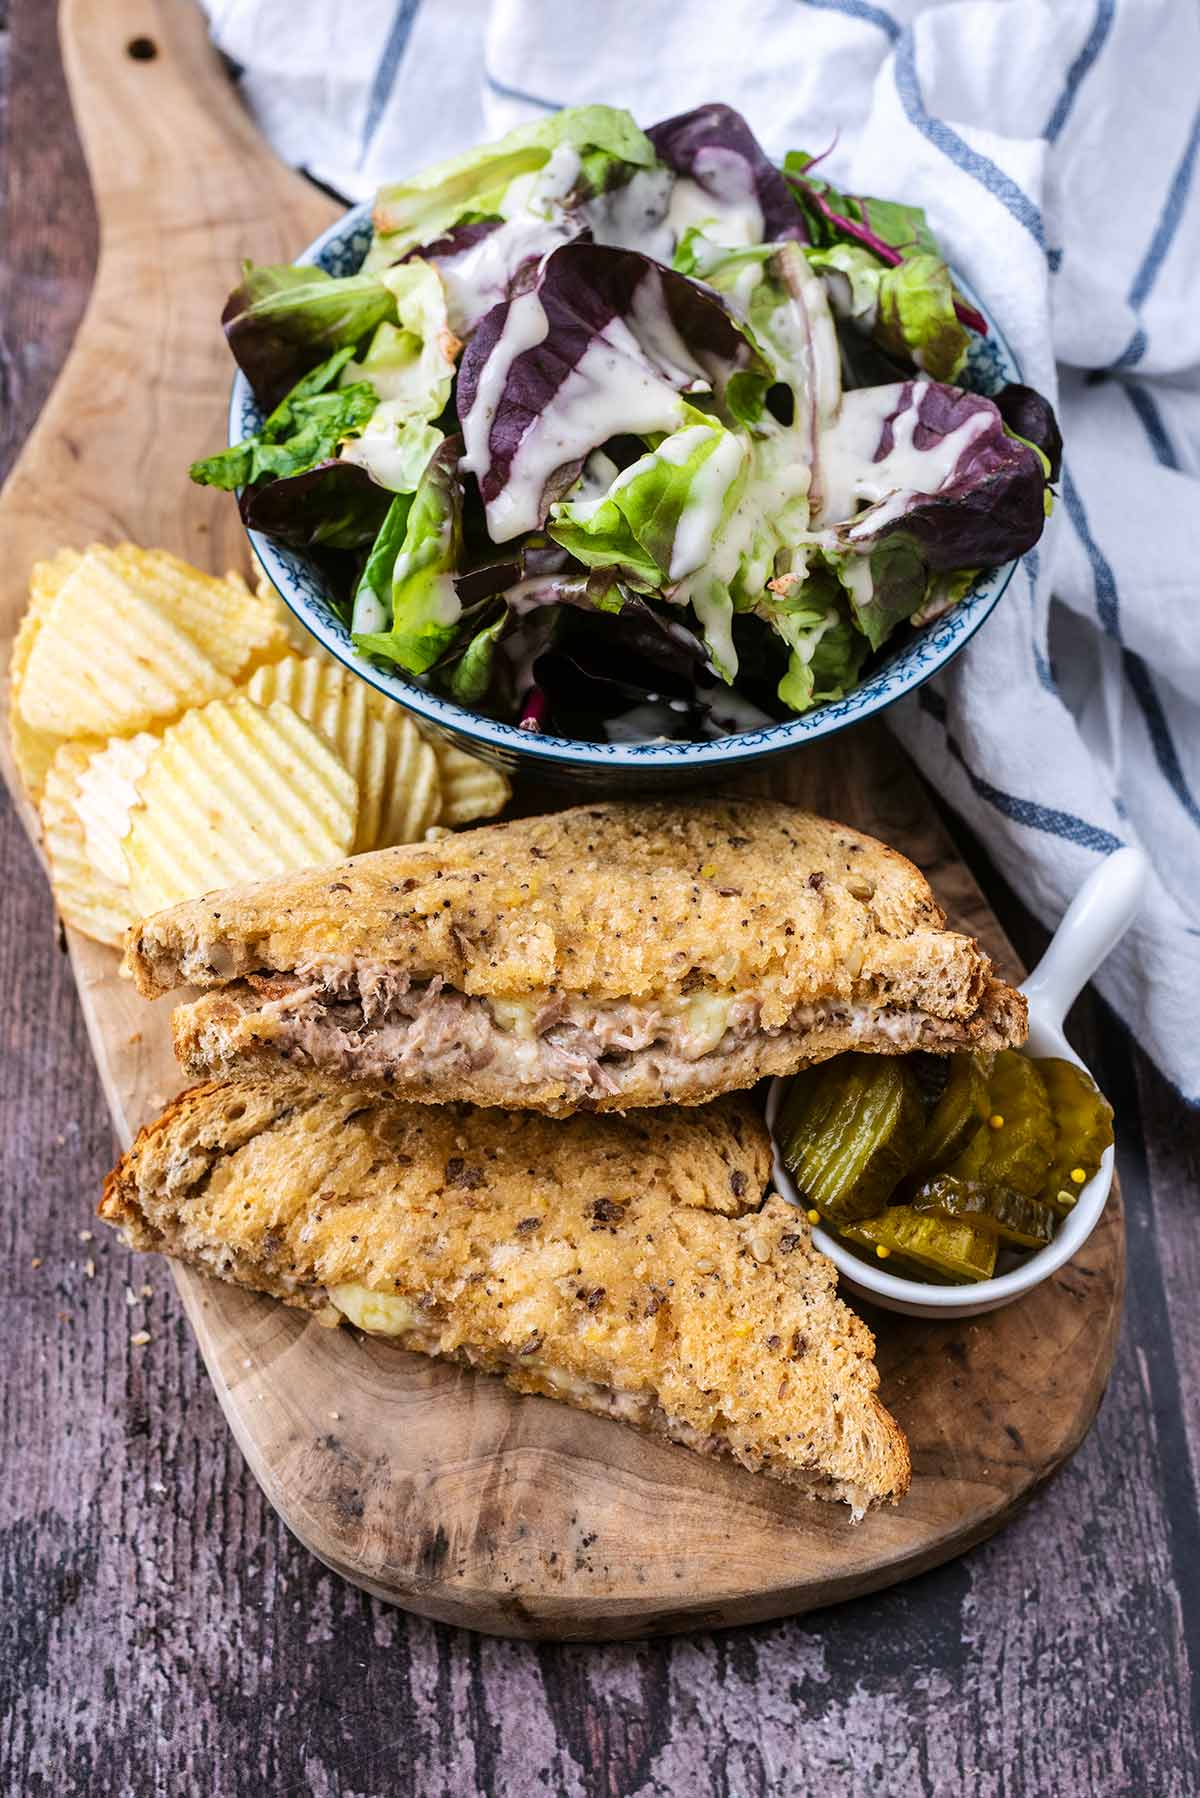 Toasted tuna and cheese sandwich on a wooden board with a bowl of salad.